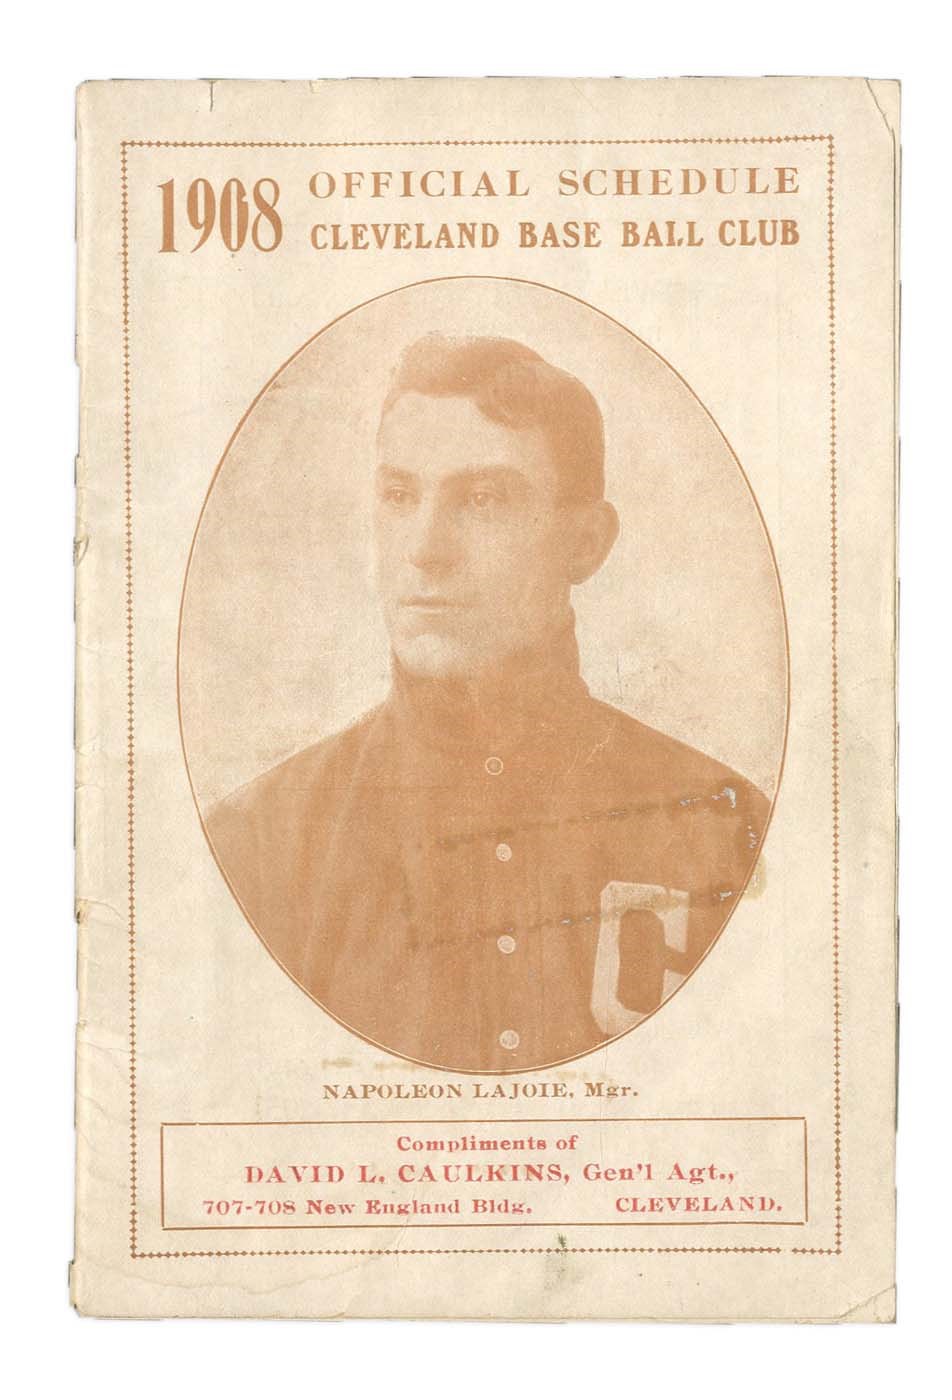 Cleveland Indians - Very Rare 1908 Cleveland Base Ball Yearbook/Schedule